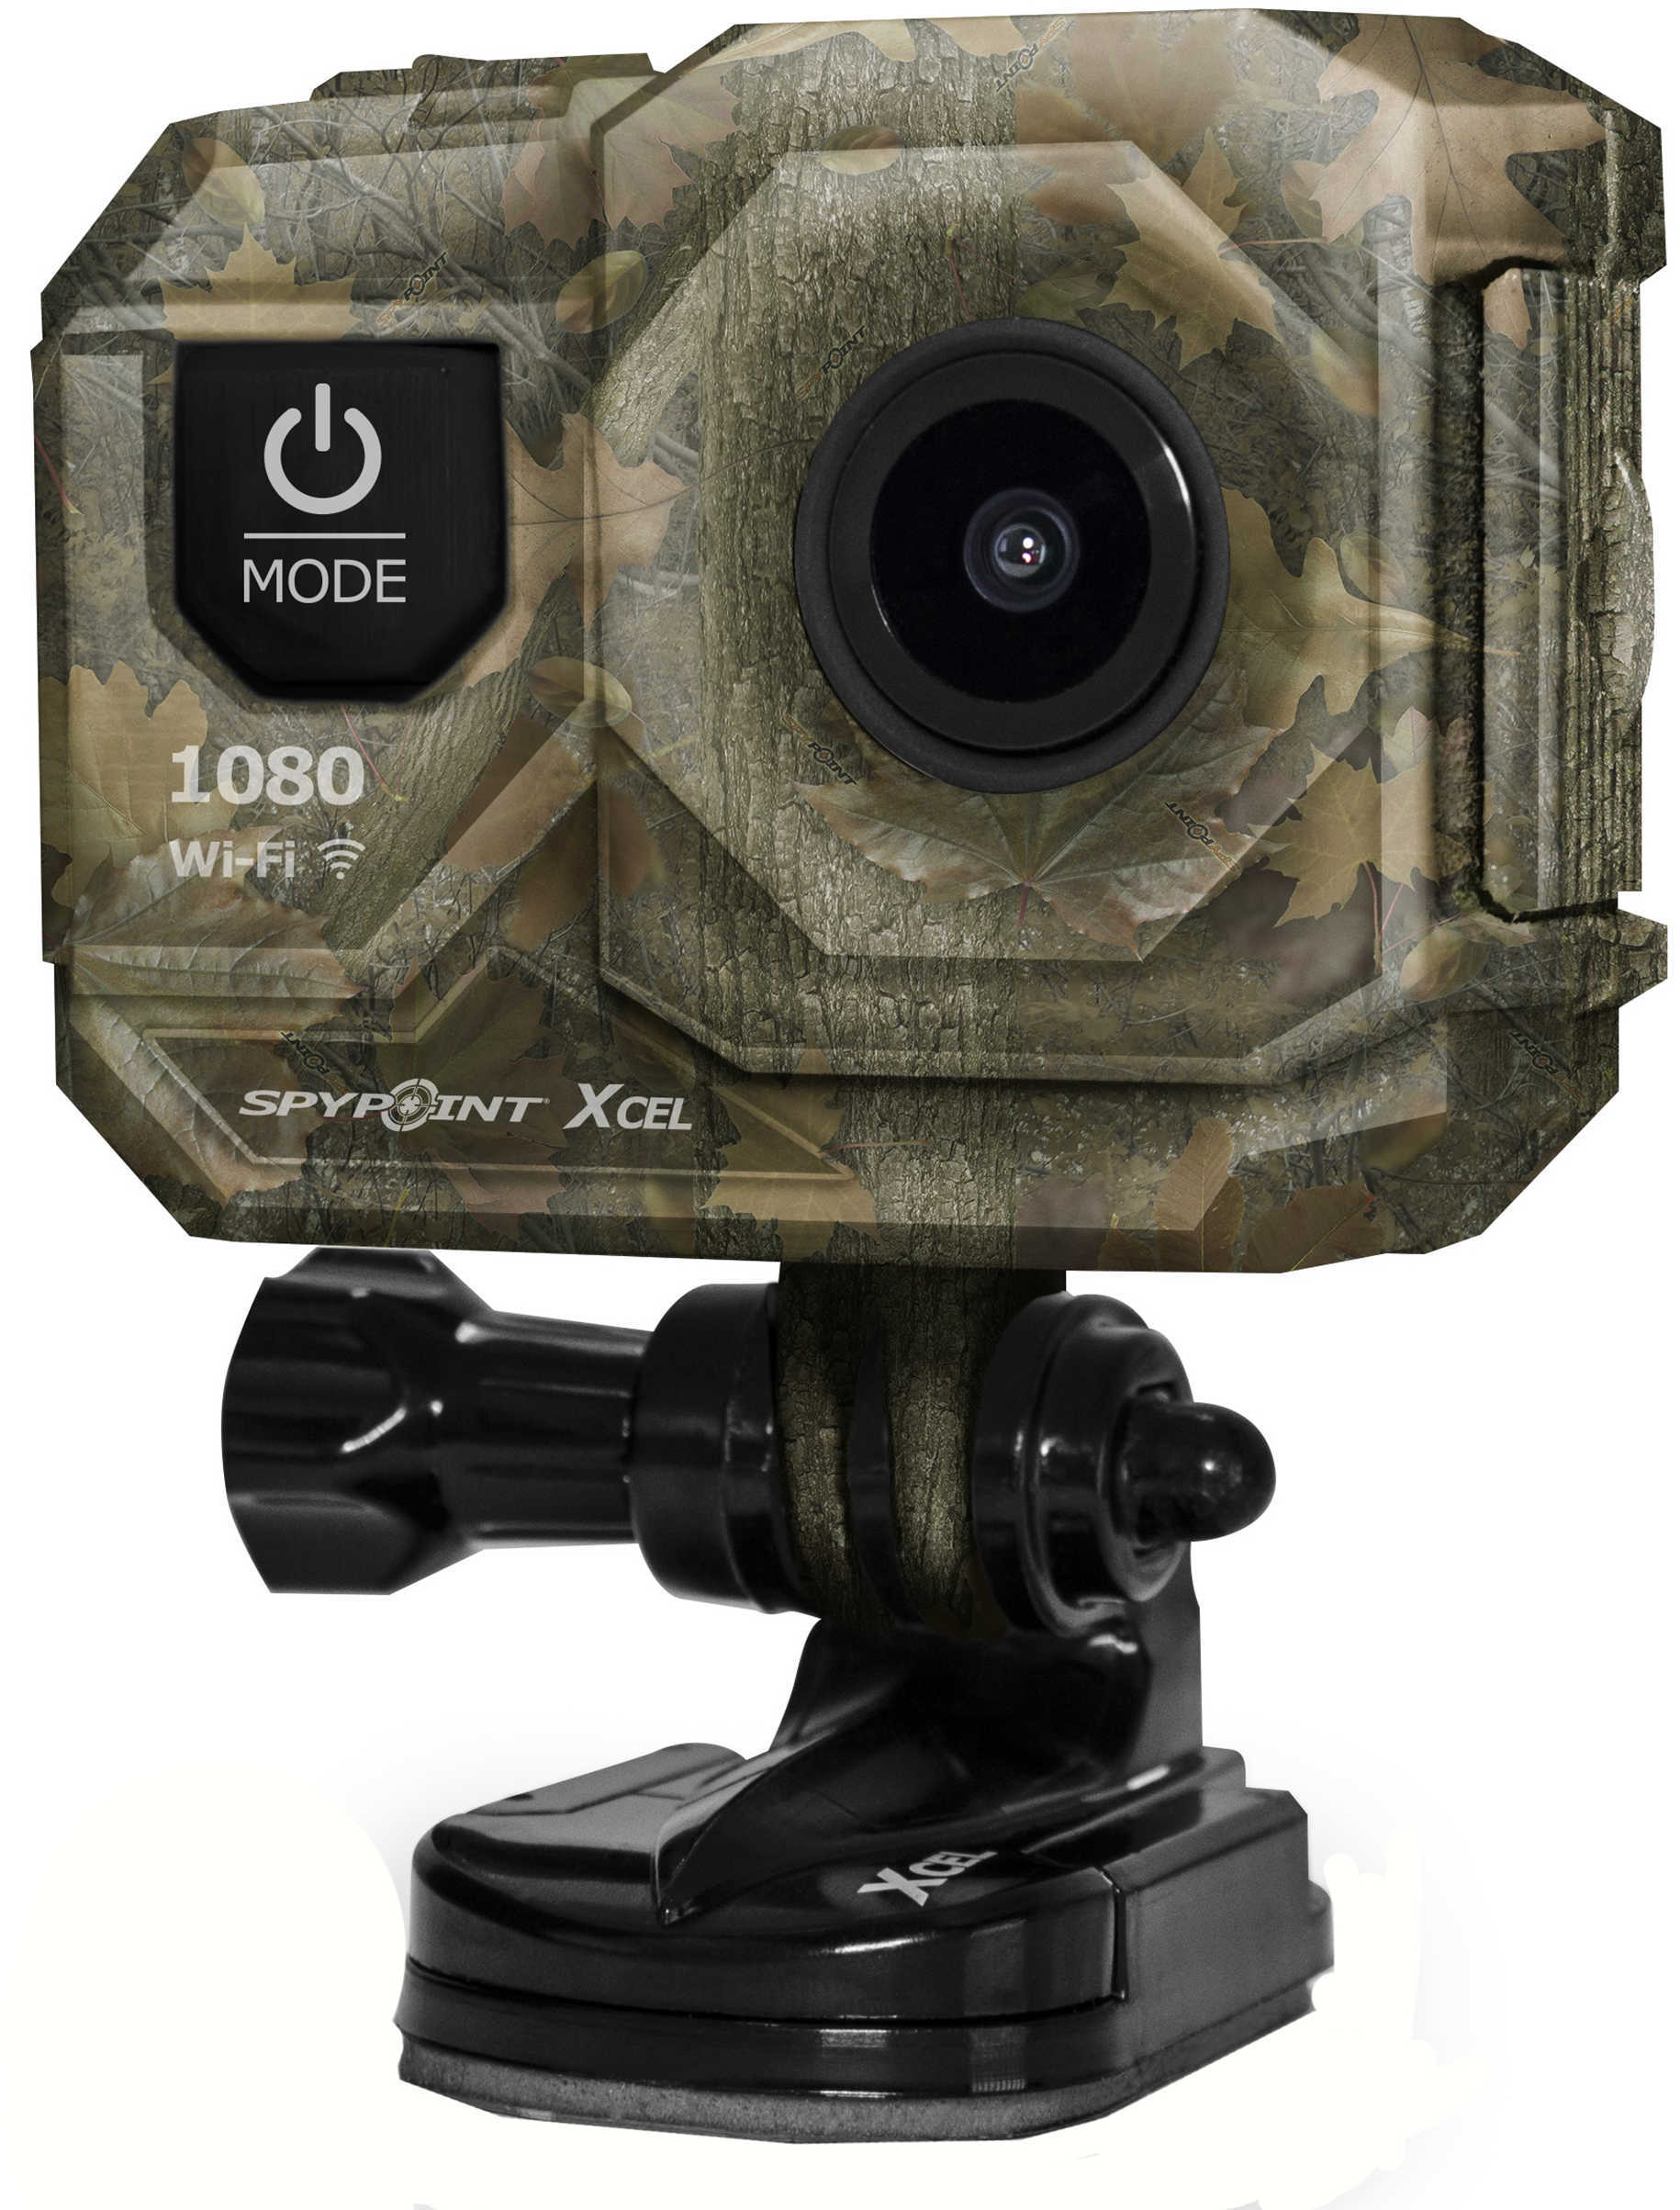 Spy Point XCEL 1080 Hunt Action Cam Camo Md: